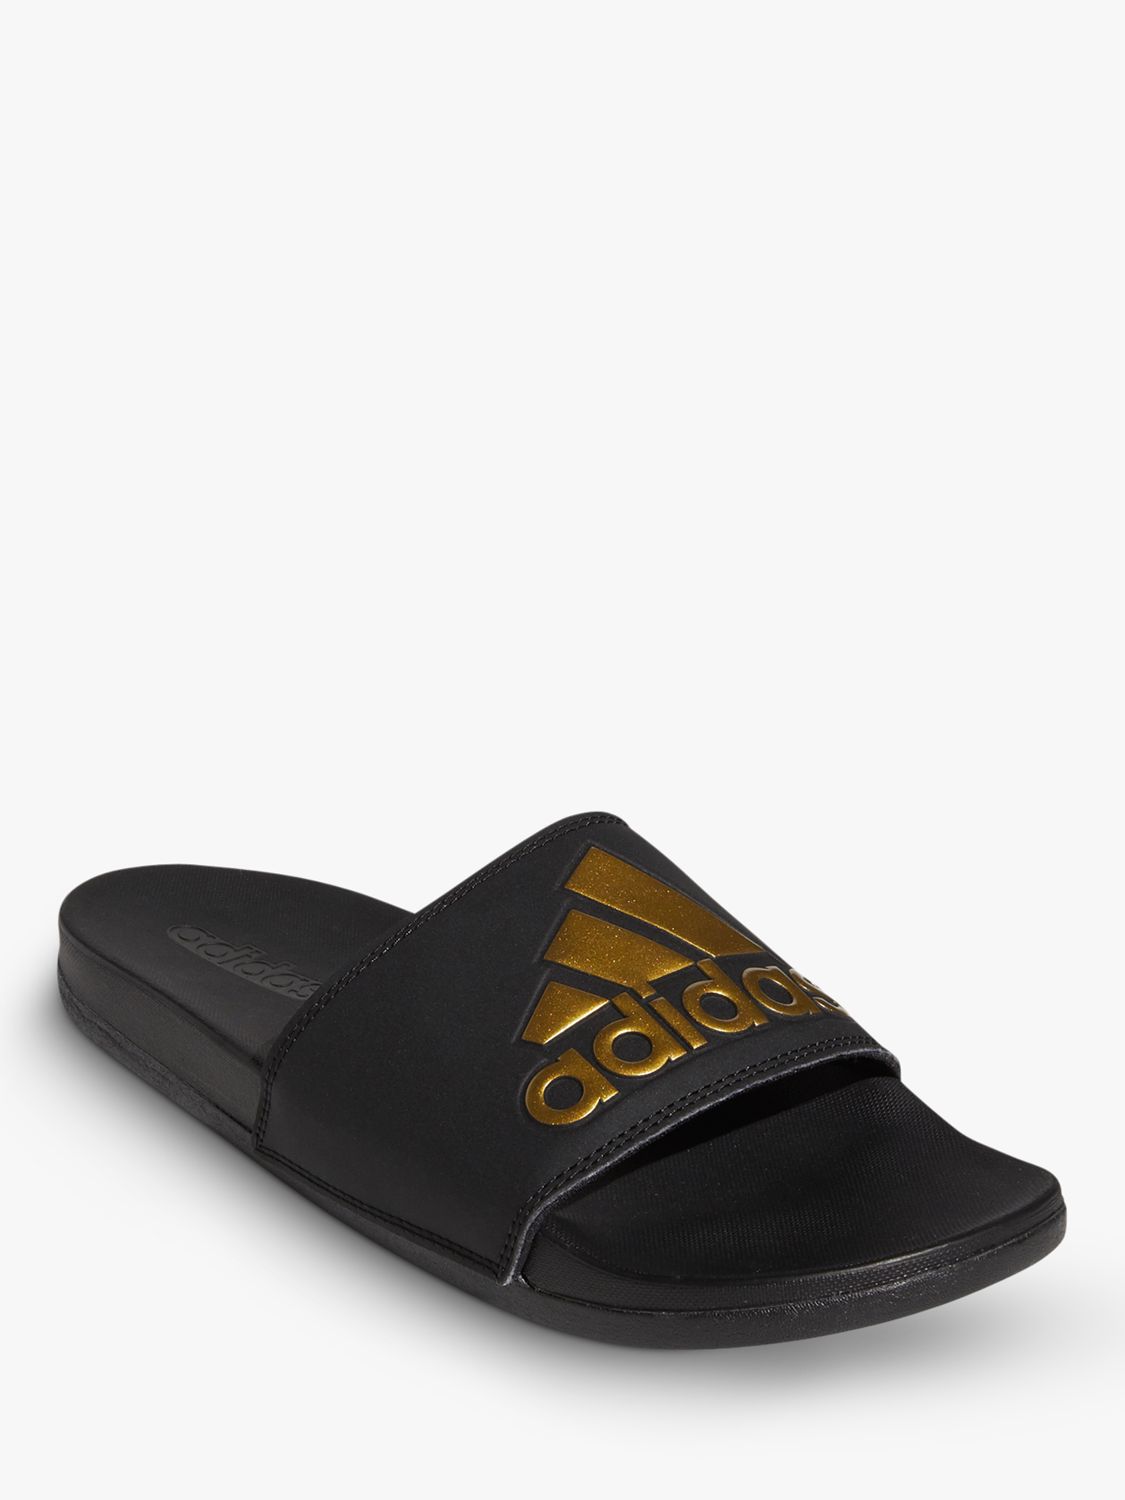 adidas slippers gold